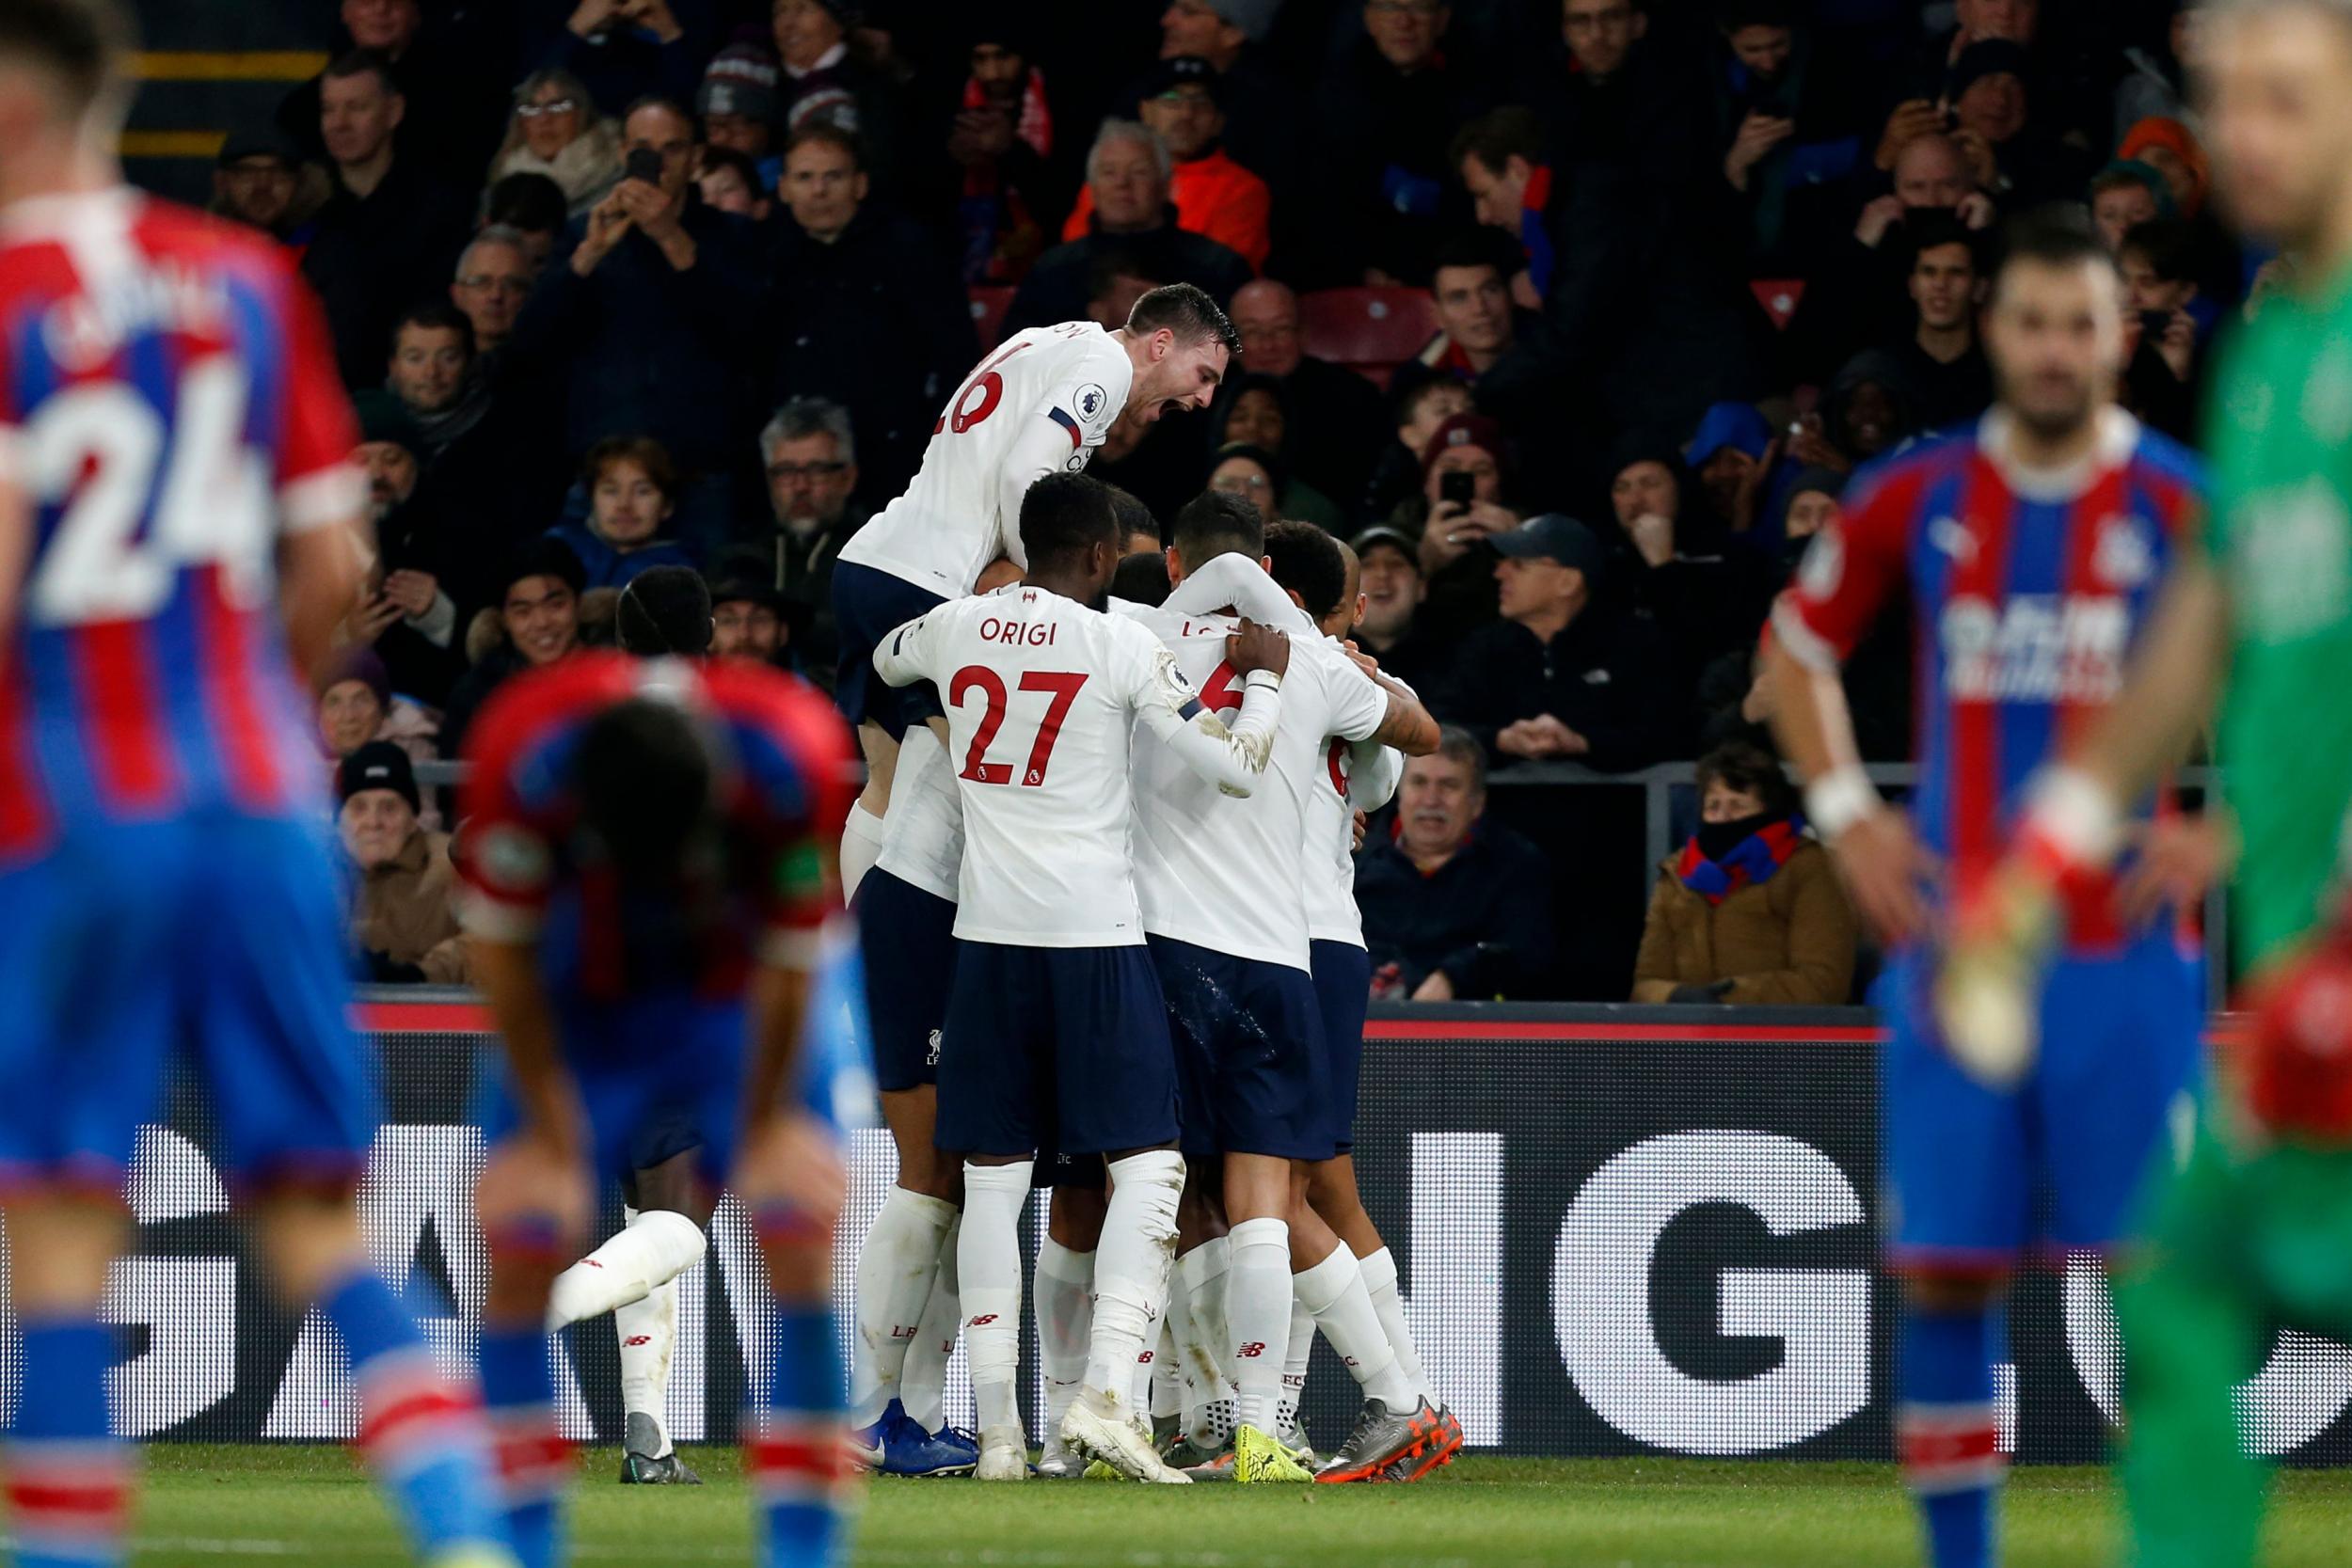 Crystal Palace vs Liverpool: Five things we learned from another late win for Jurgen Klopp's Reds